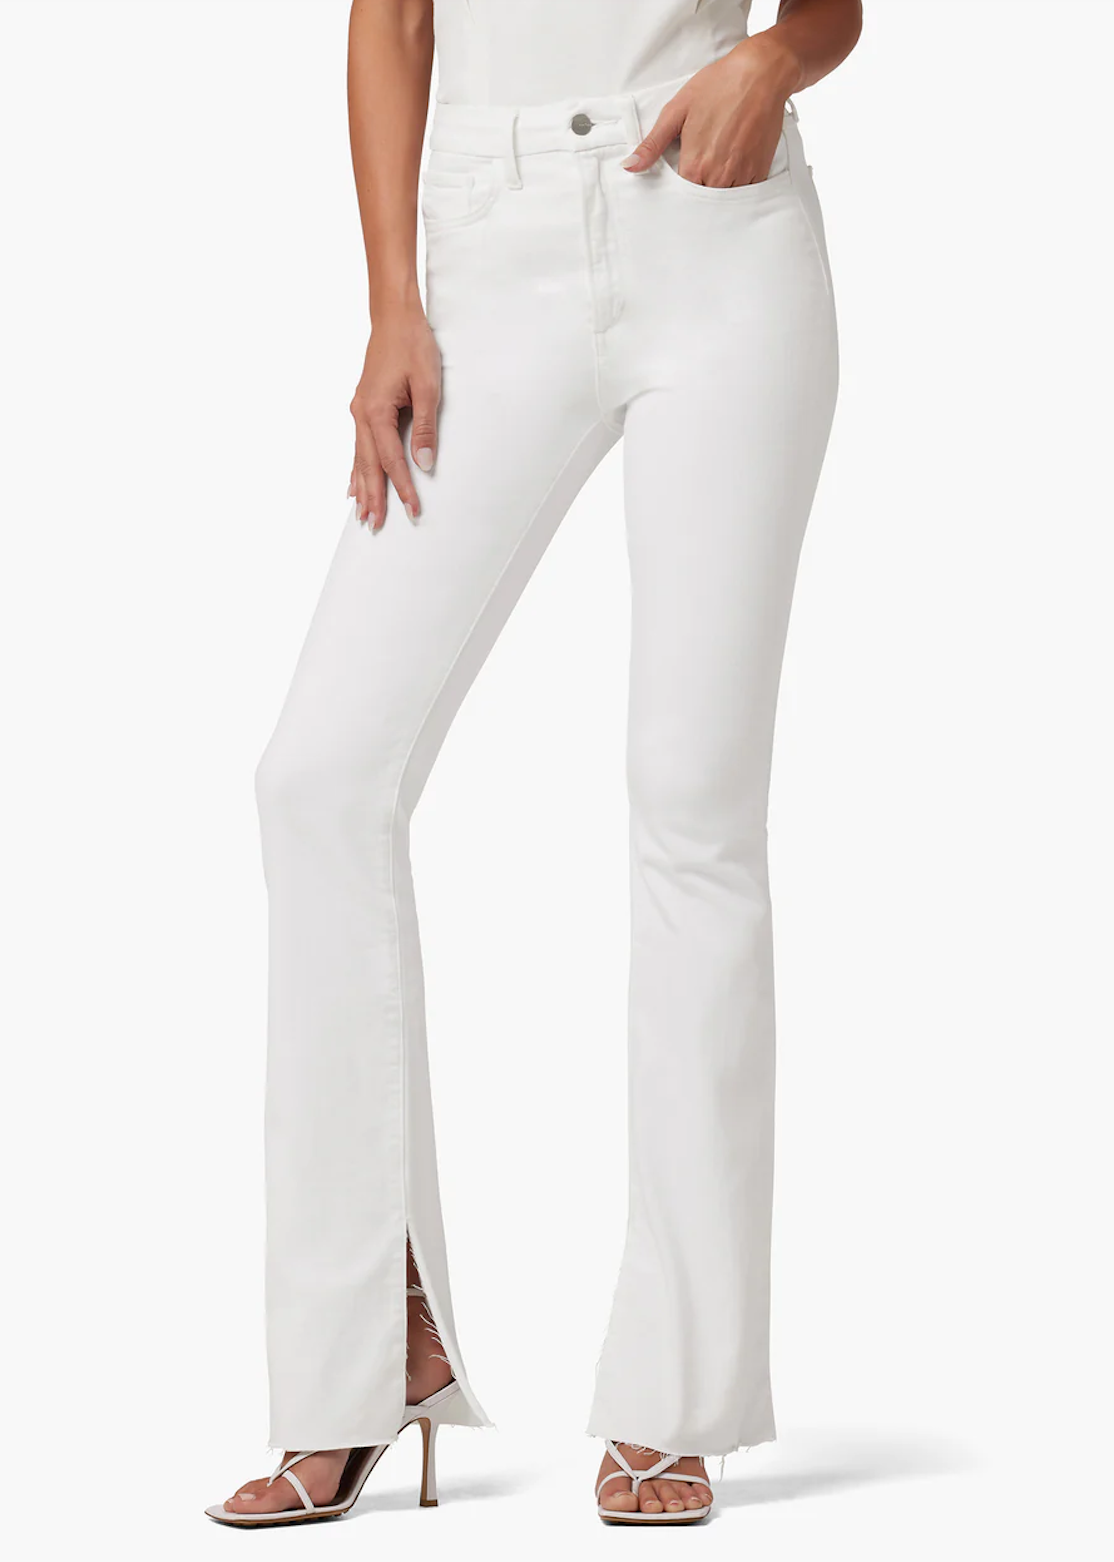 JOES JEANS THE HI HONEY CURVEY BOOTCUT IN WHITE